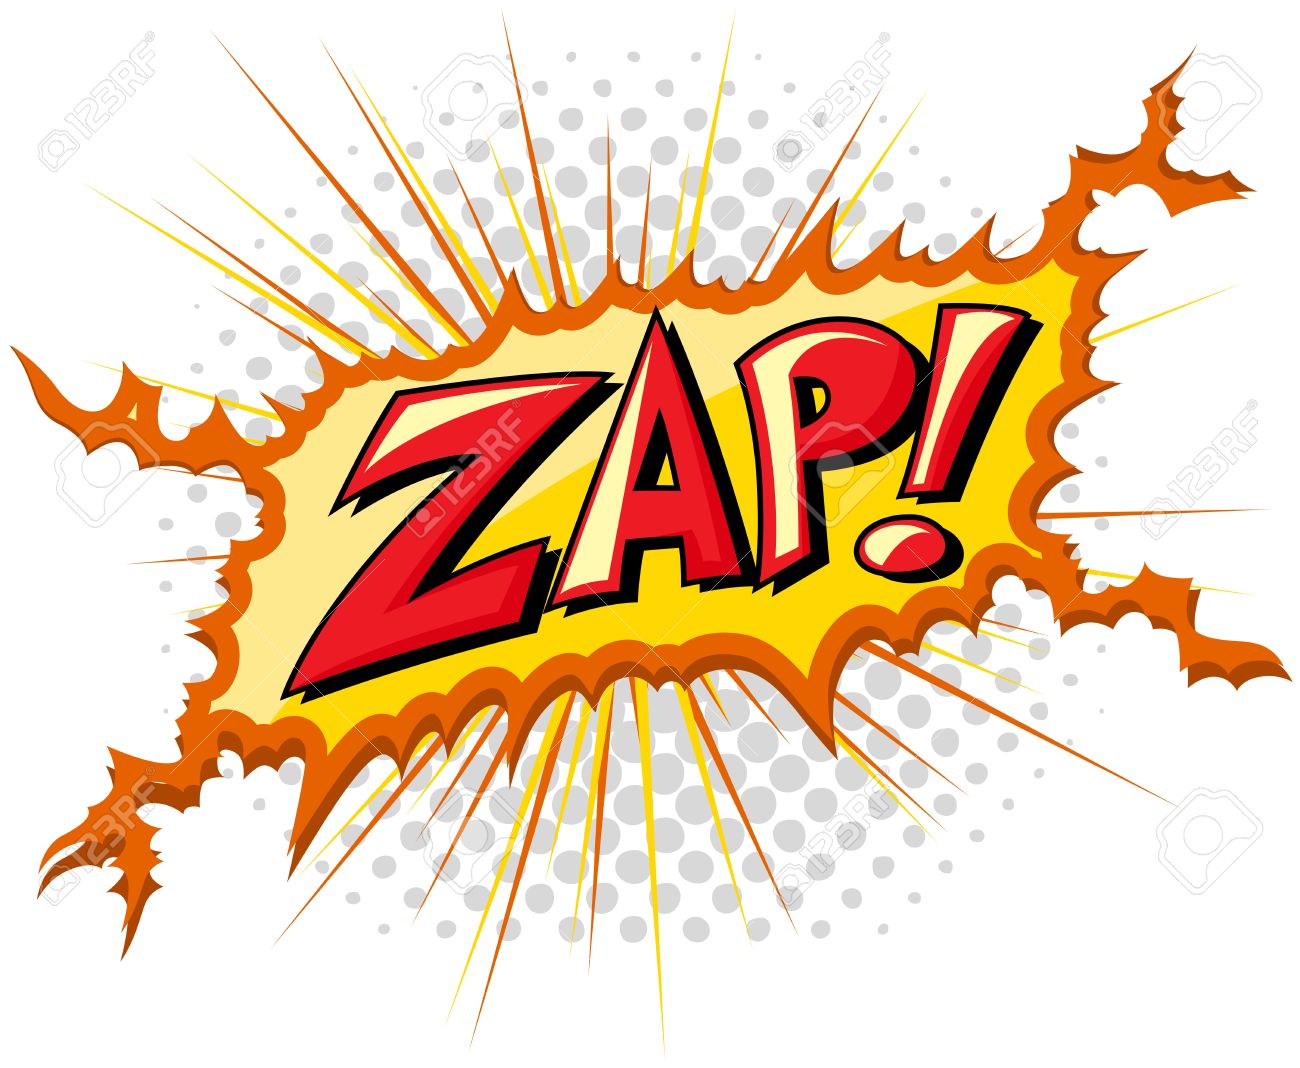 Amazing Zap Pictures & Backgrounds